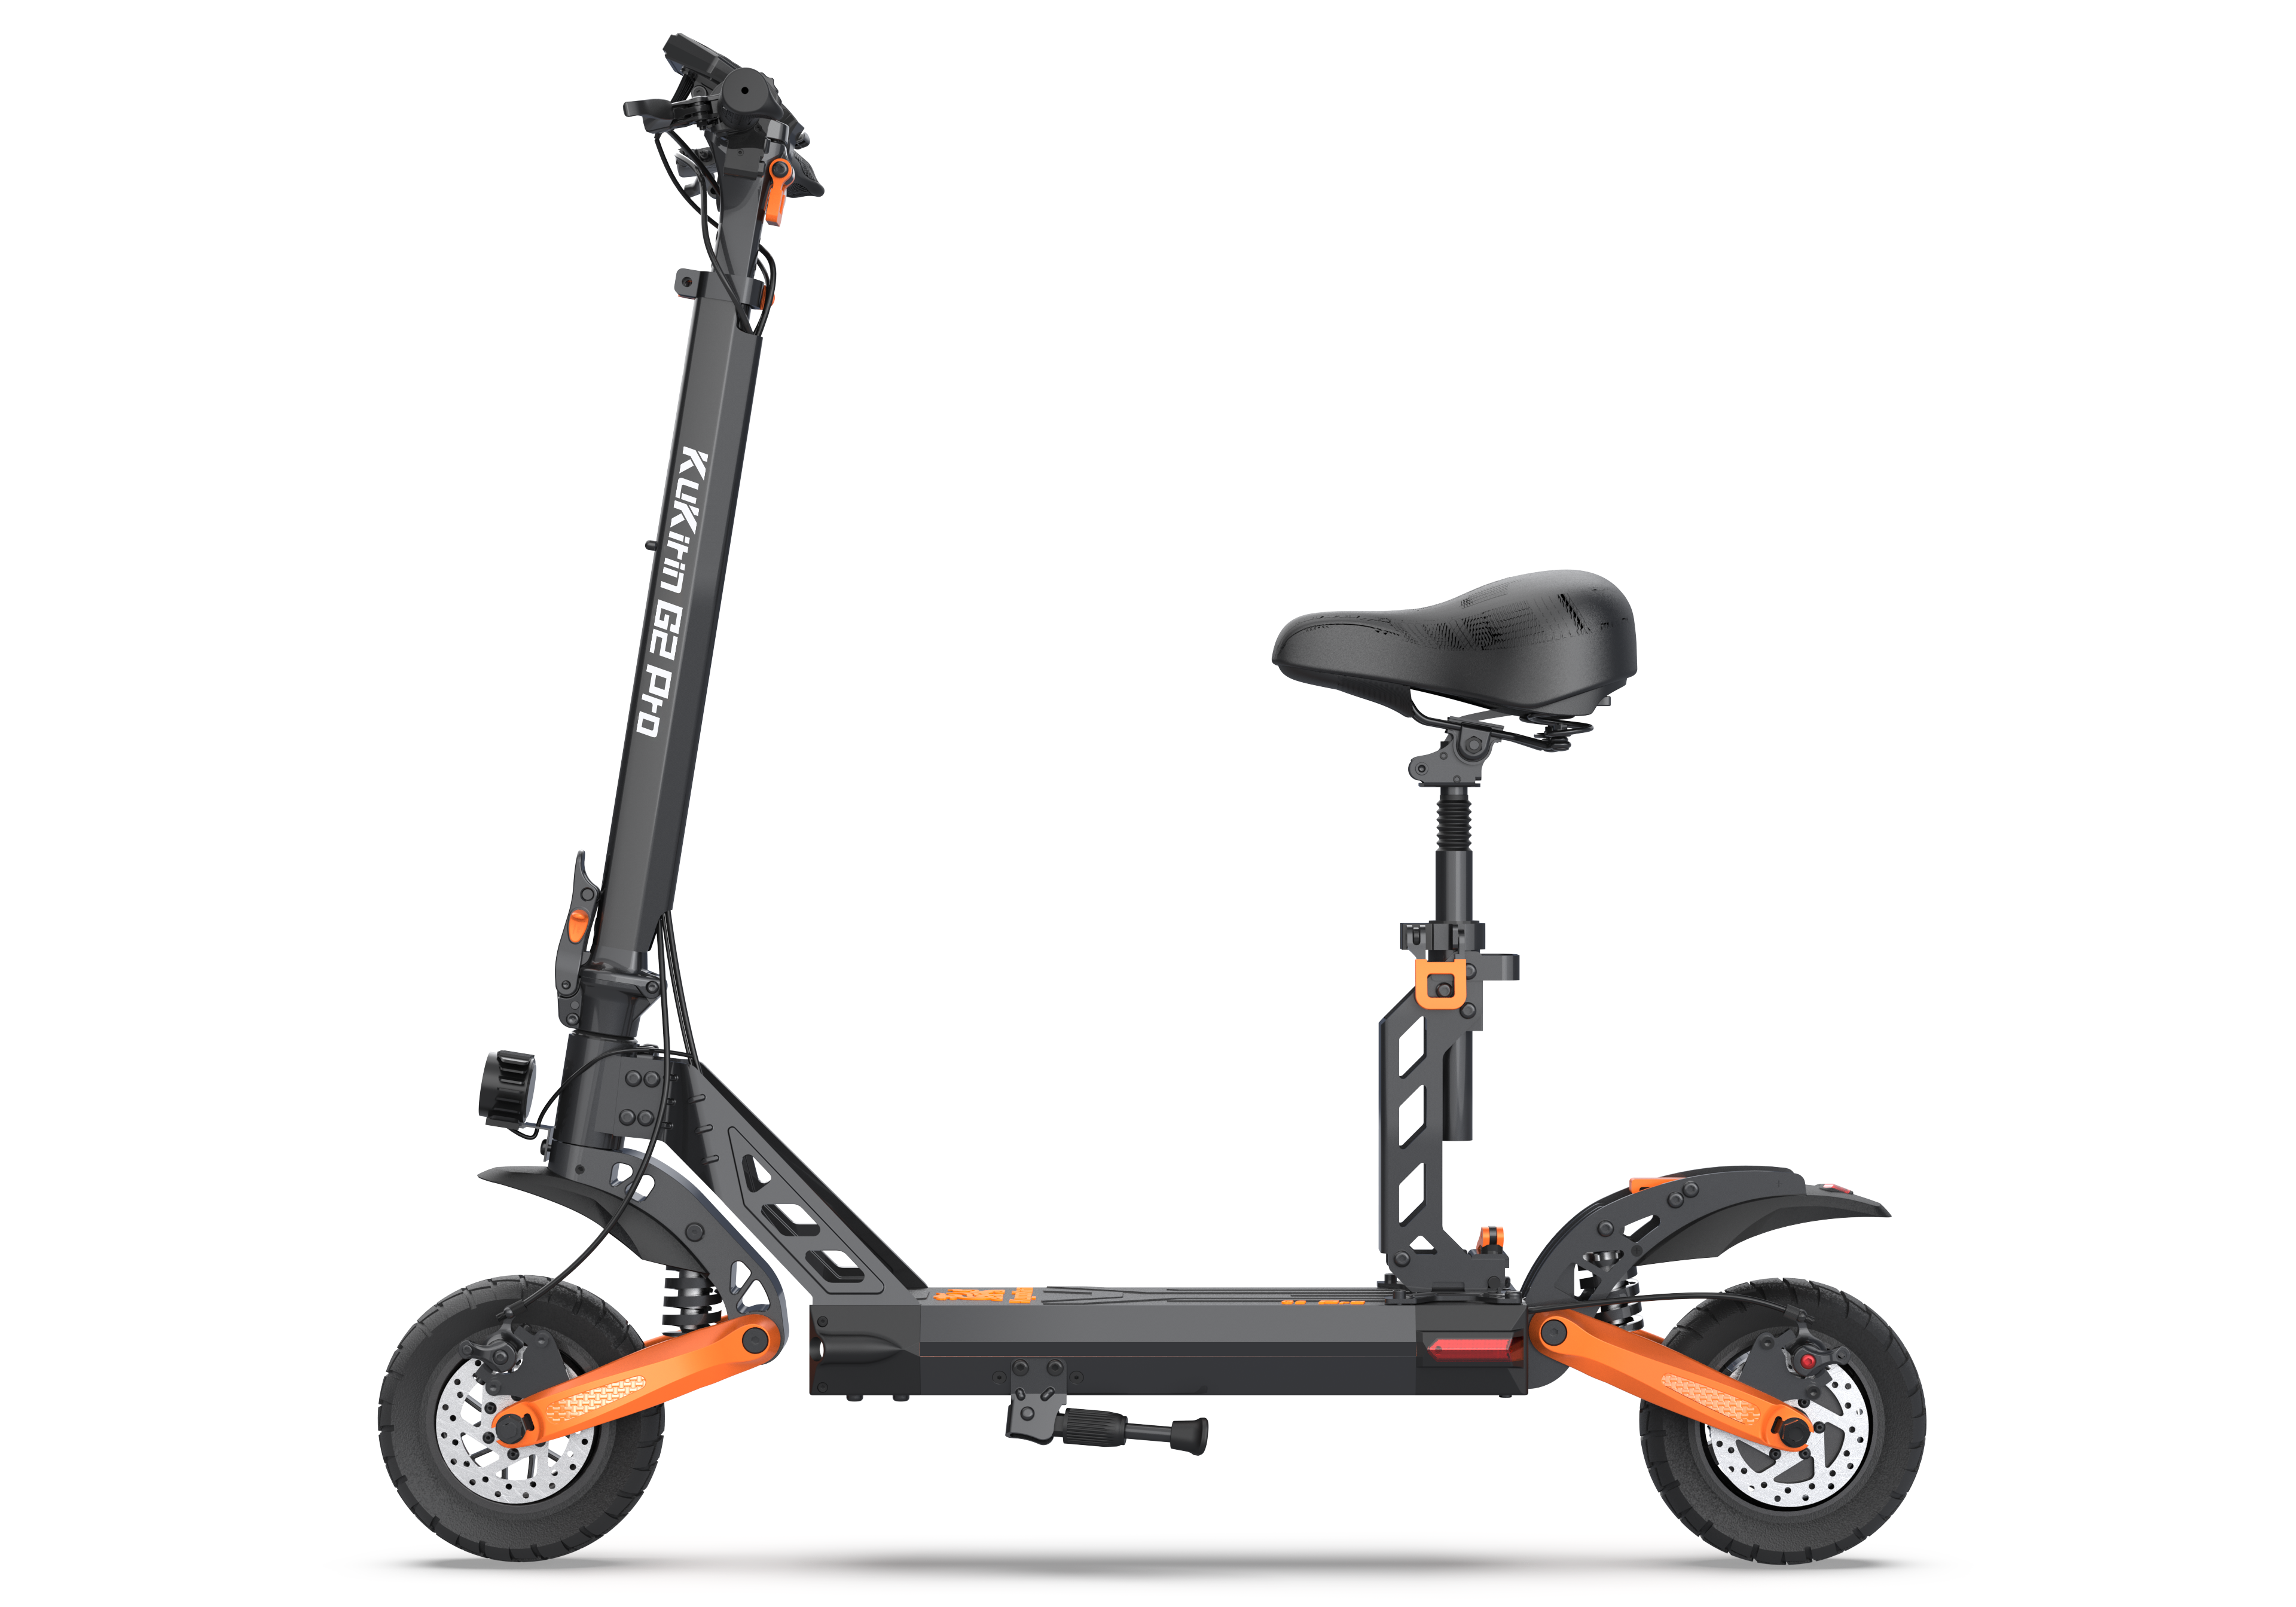 How fast is a 600W electric scooter?